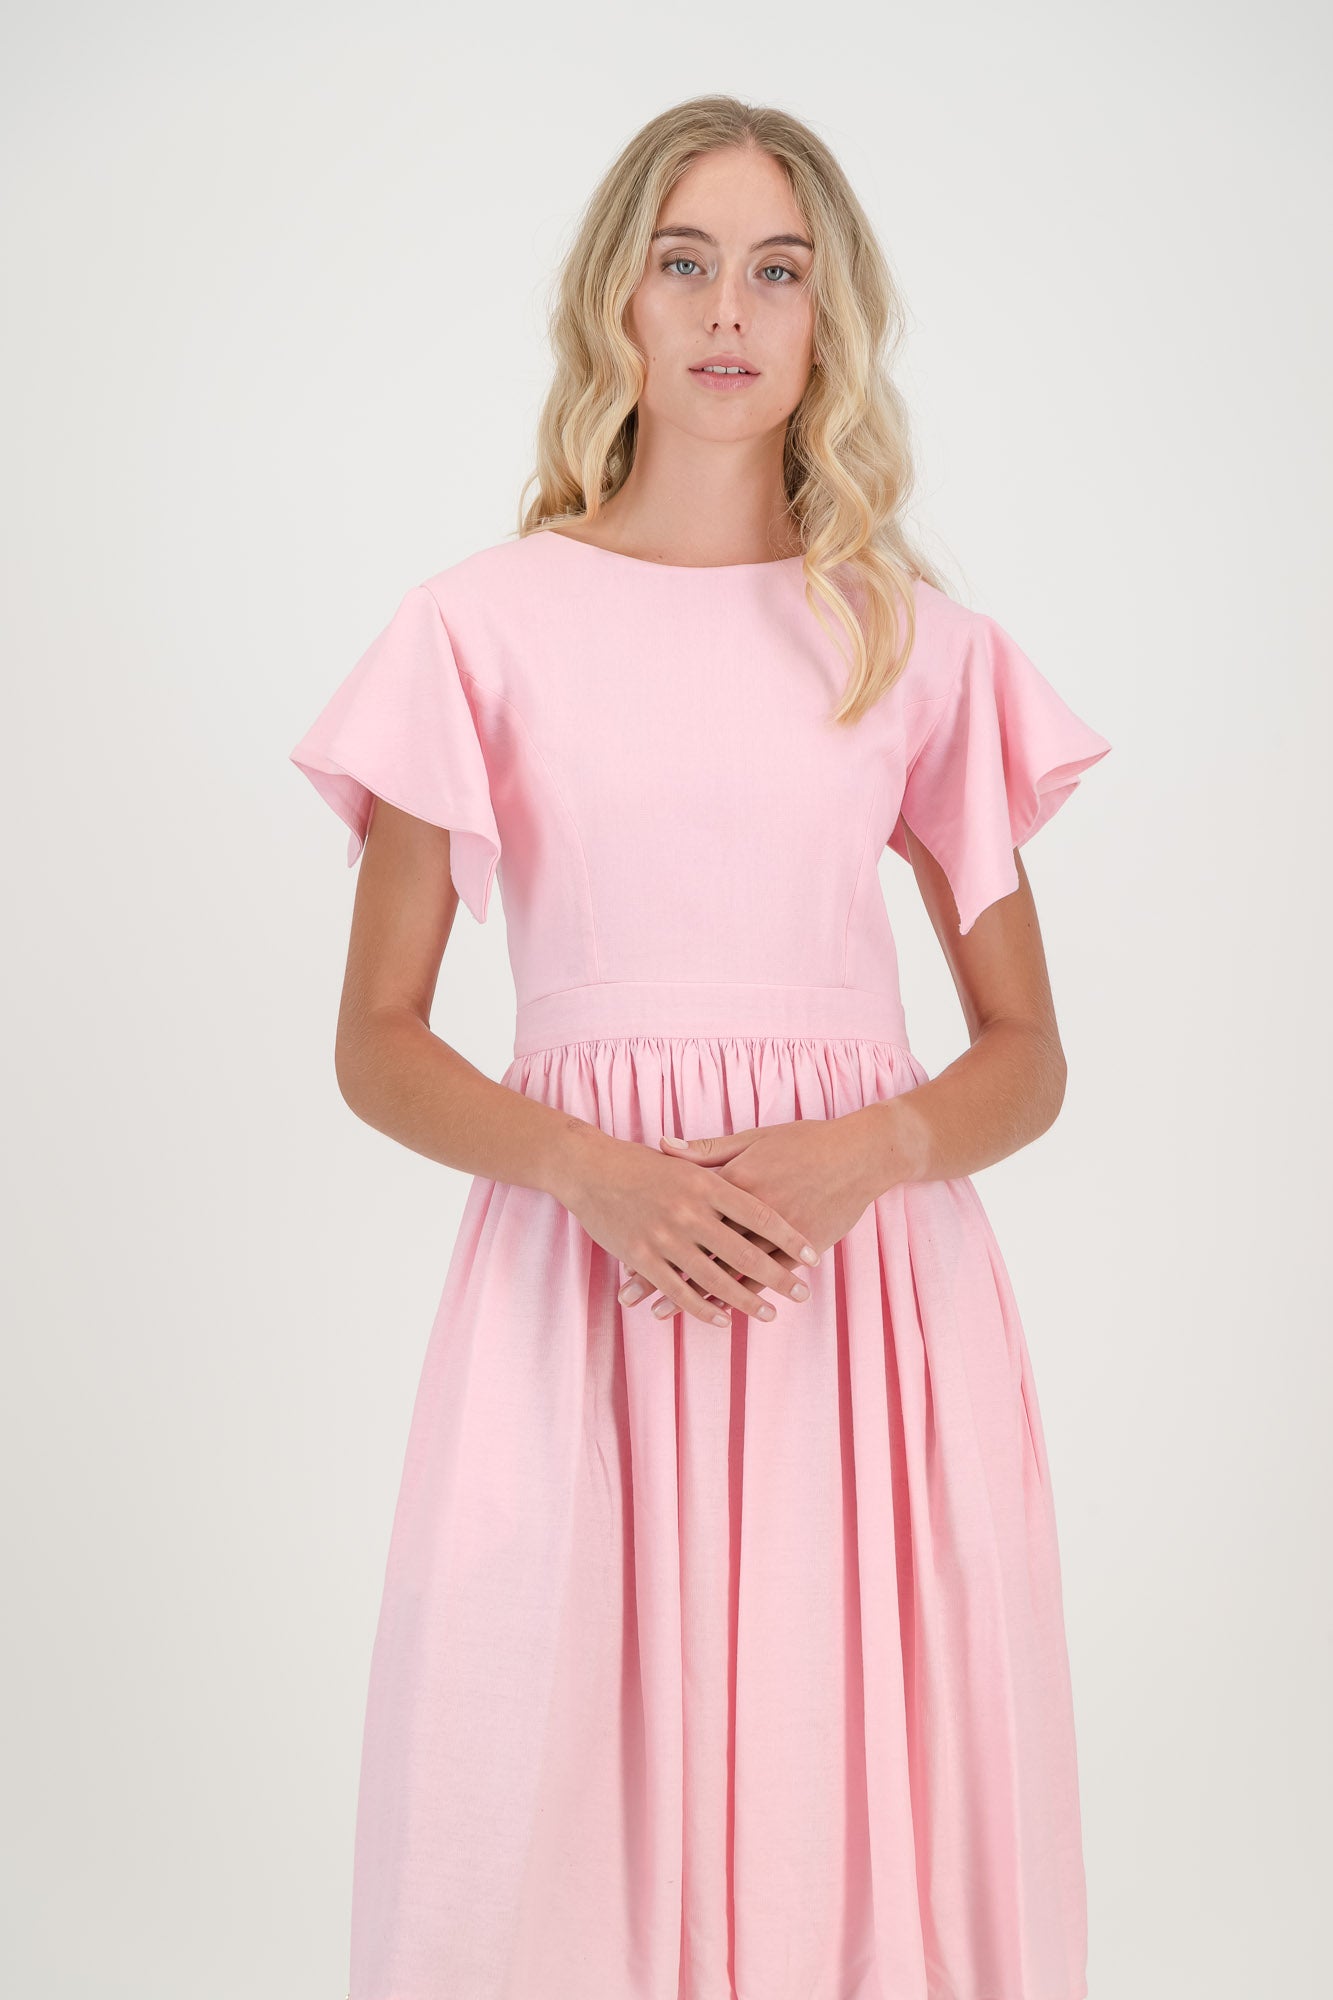 The Pink Camelia Open Back Dress